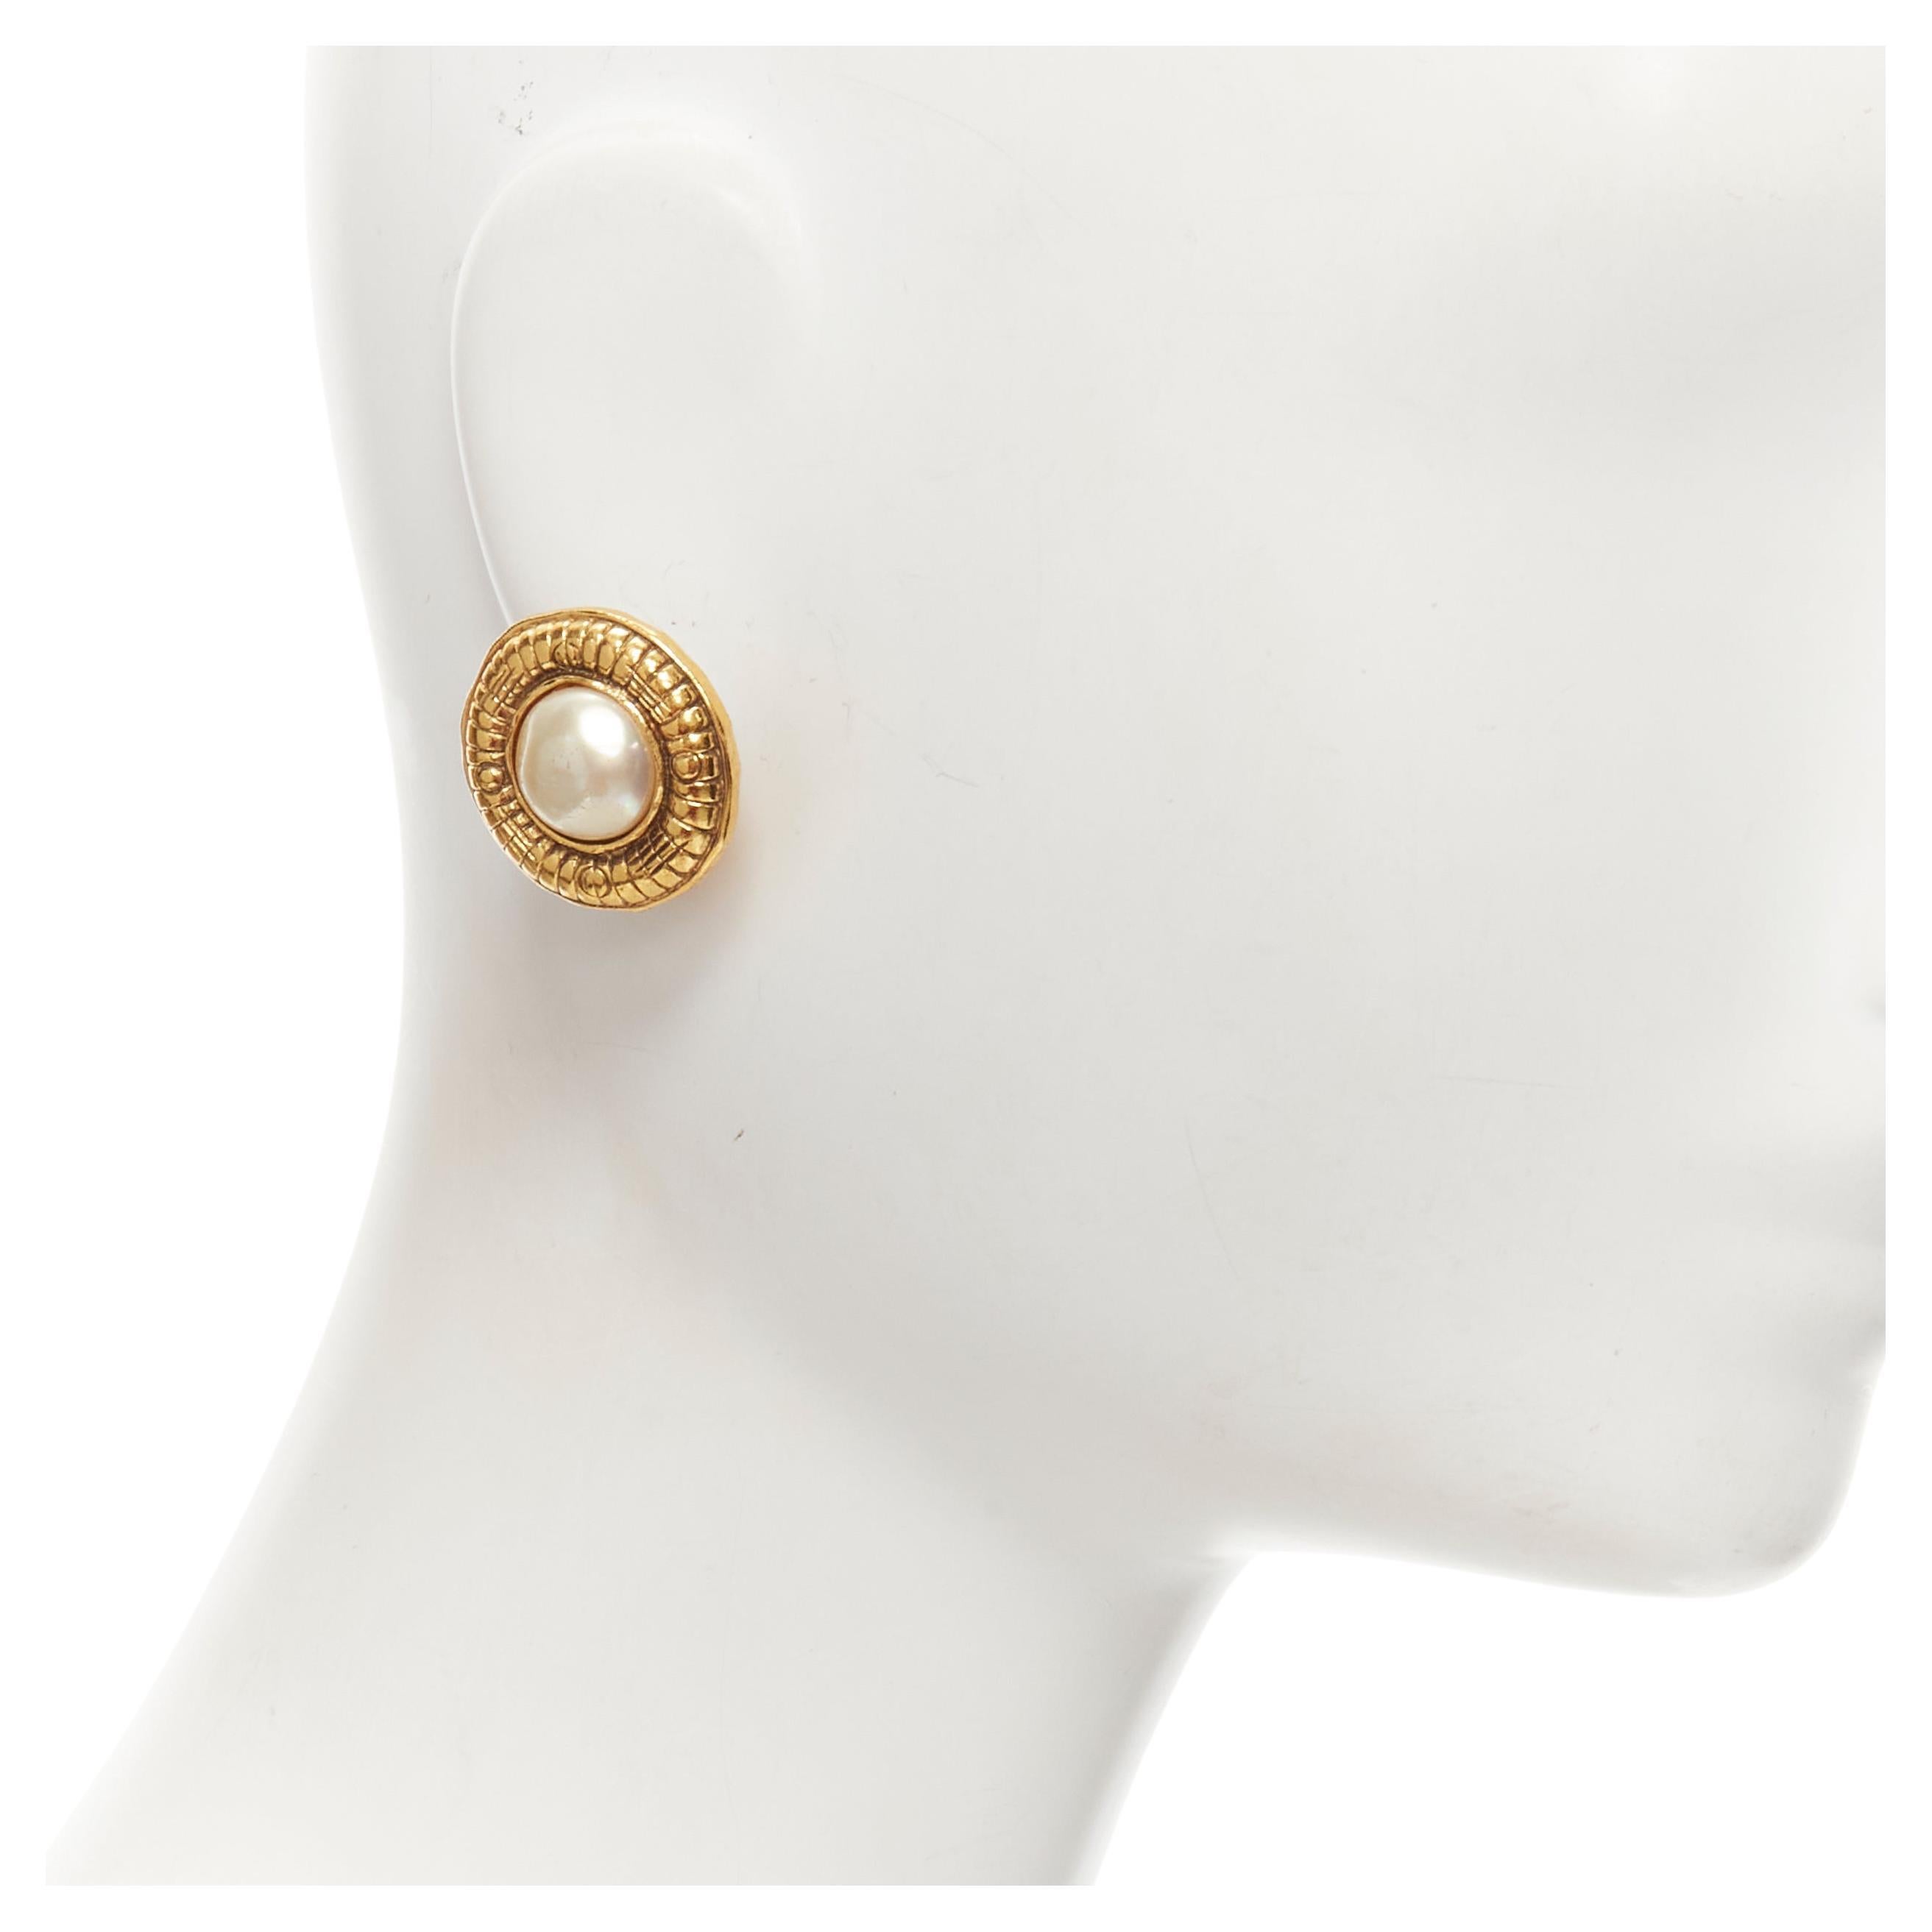 Chanel Round Frame CC Faux Pearl Clip On Earrings Golden Metal ref